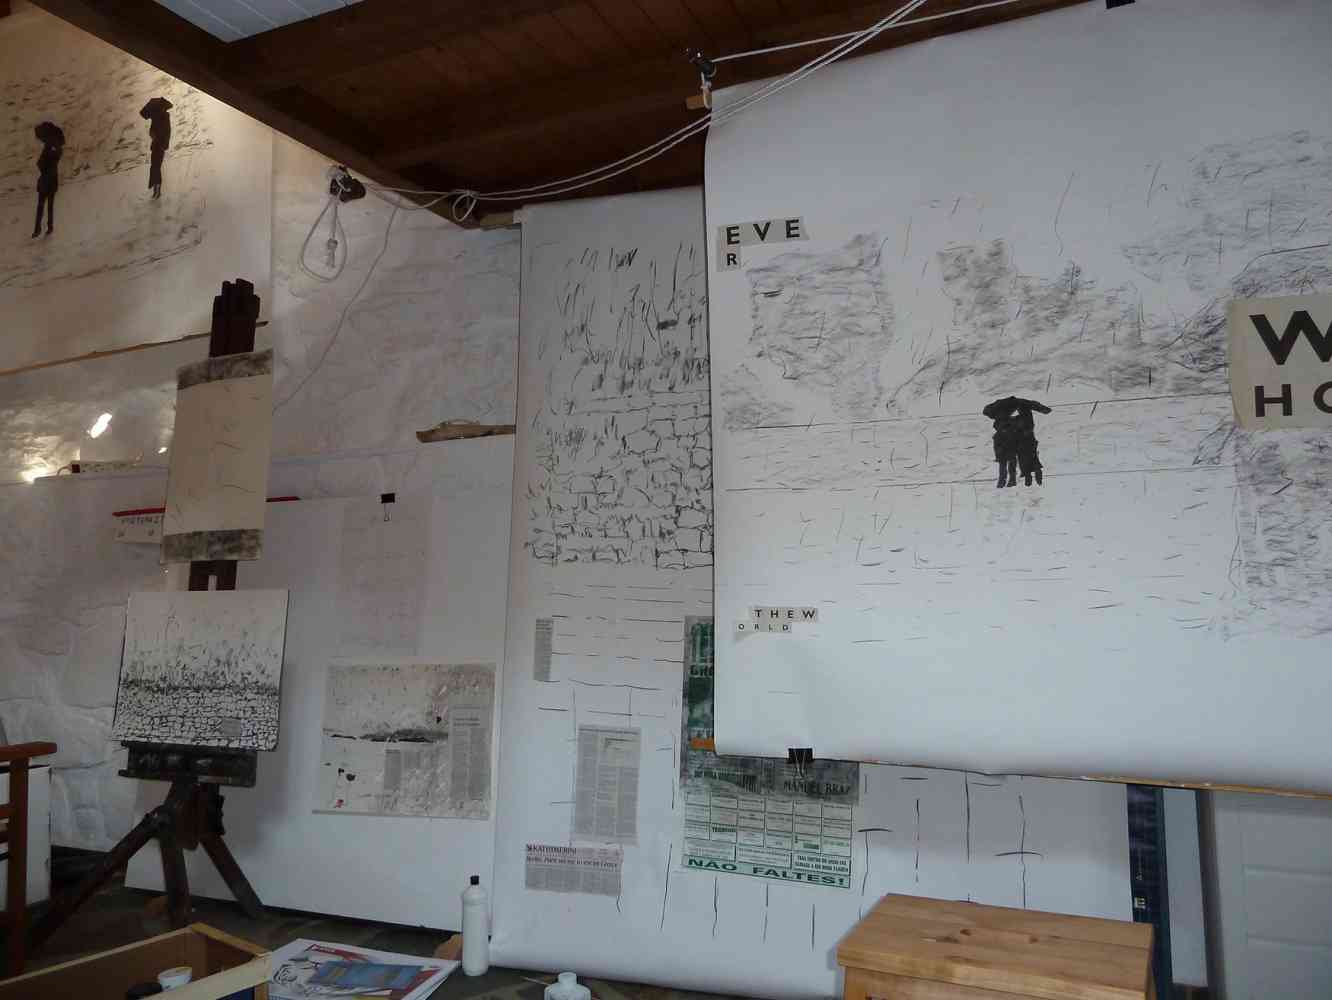 Studio as basis of all projects and ideas:   (Action develops Thought) - Shot of my drawing studio in Greece... Exploring visual ideas for a feature film 'The Immortal Mortal'